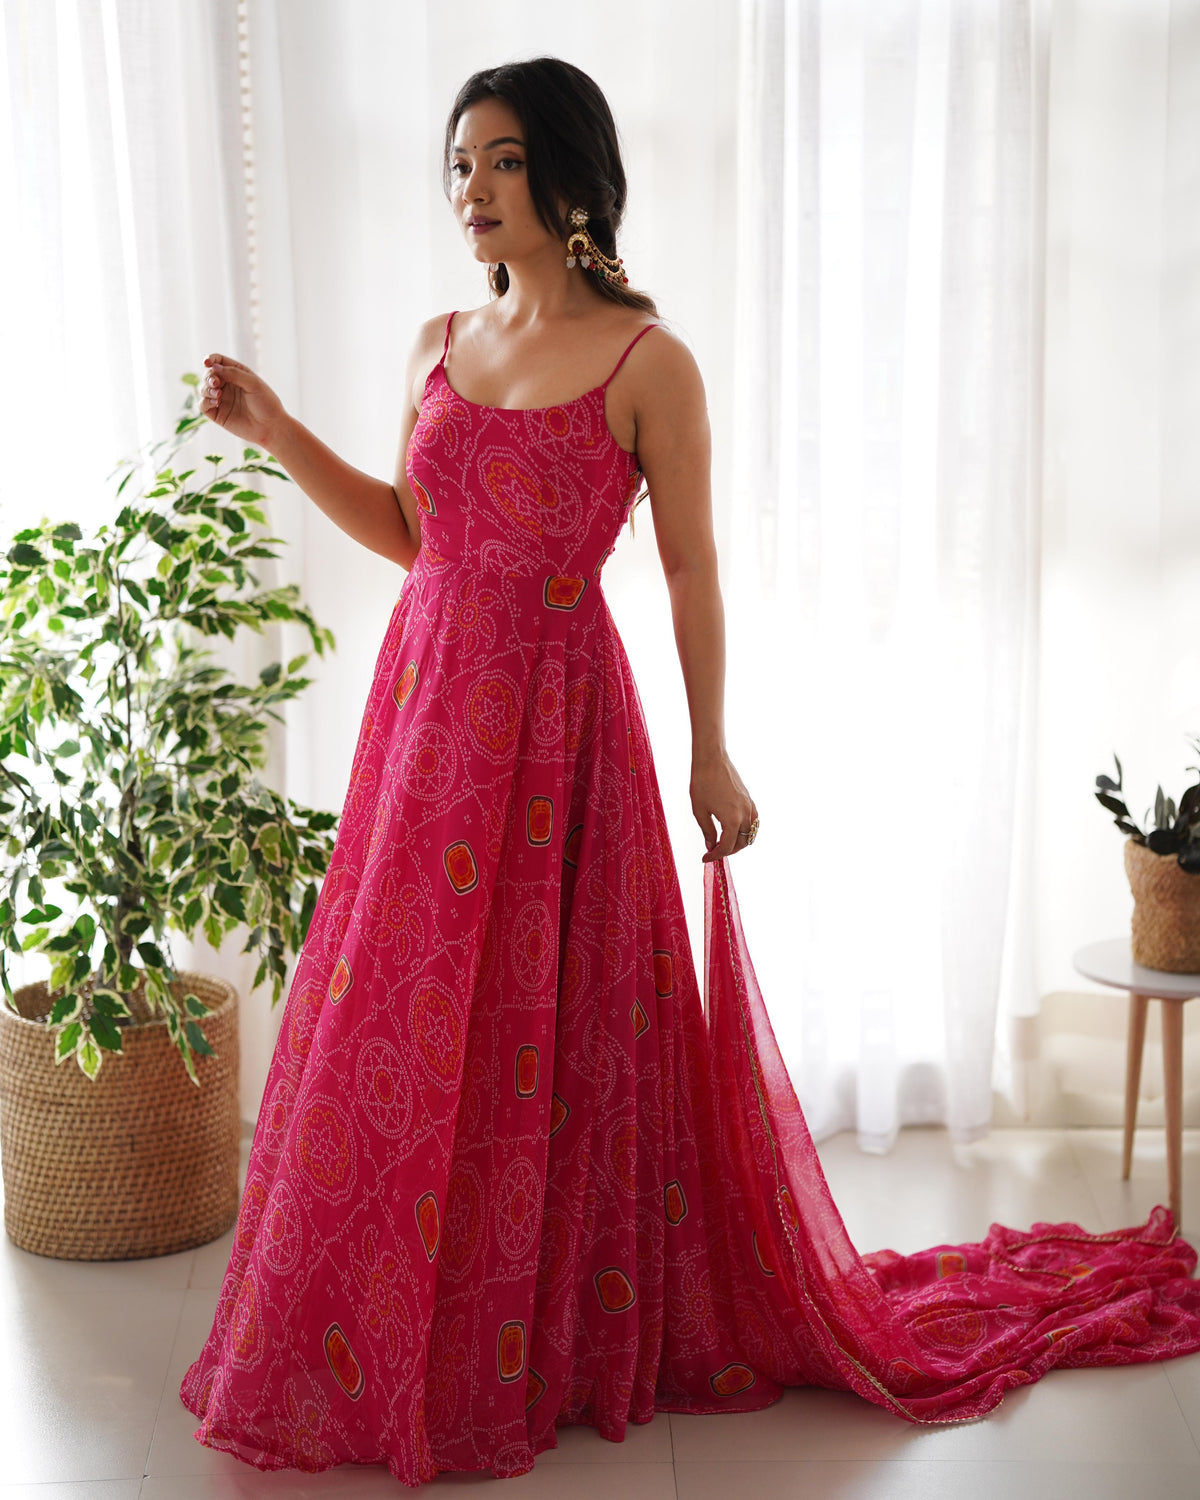 Launched This Chic Yet Classy Bhandhej Anarkali Suit With Trendy Back Neck